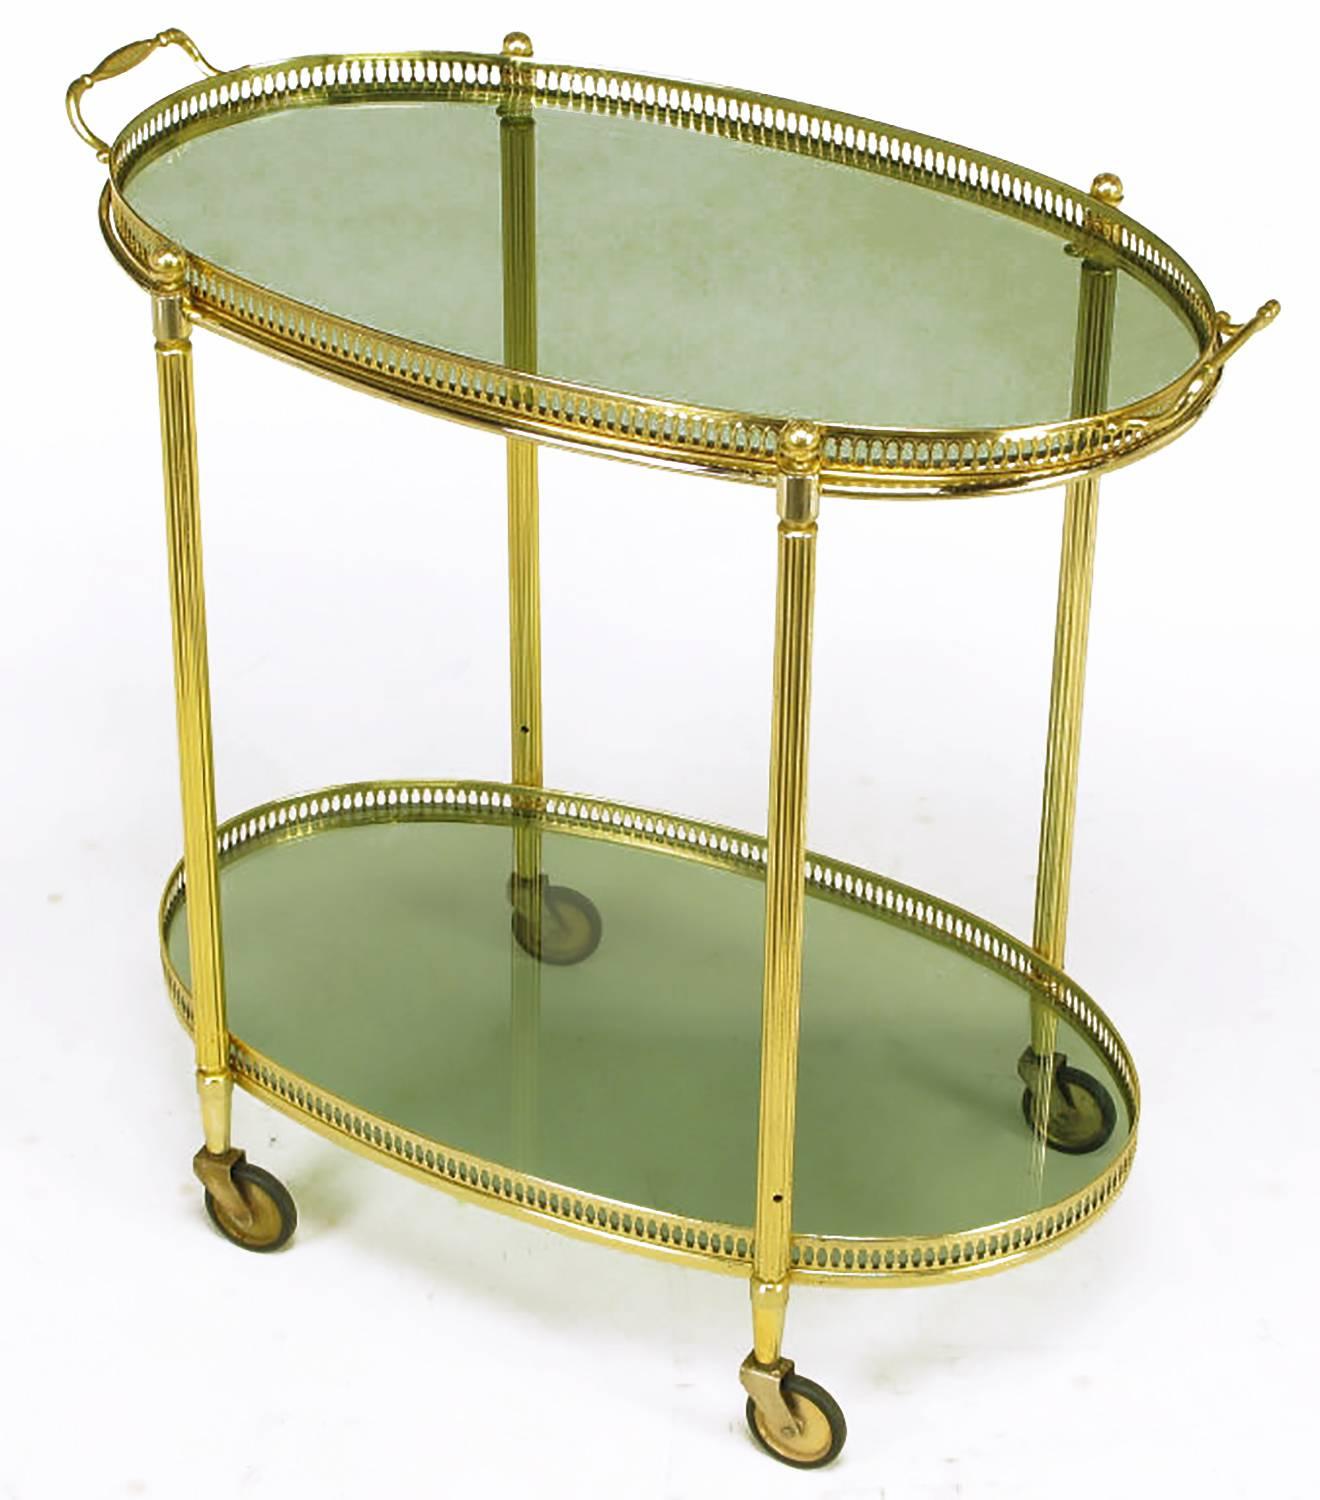 Two-tiered bar cart with pierced brass gallery and reeded brass legs. Oval smoked glass surfaces with removable two-handle top tray. Rubber tires on brass casters.